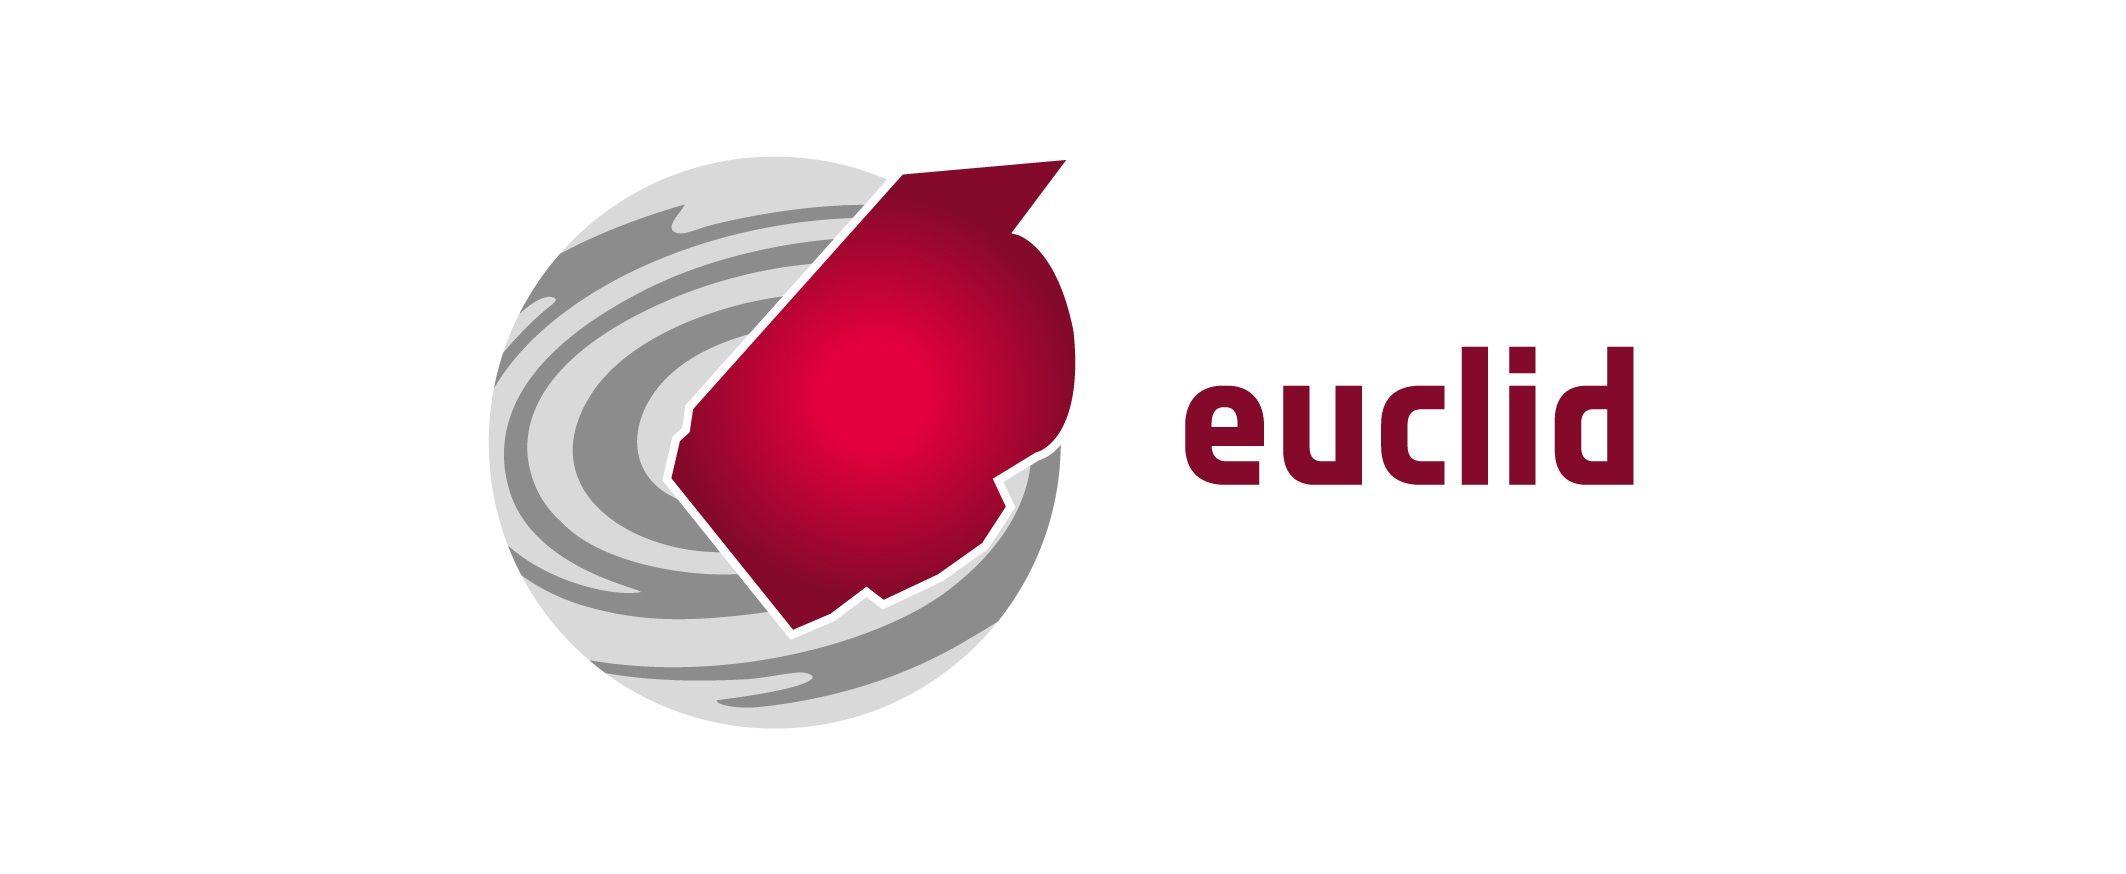 Euclid Logo - Space in Images - 2013 - 01 - Euclid logo